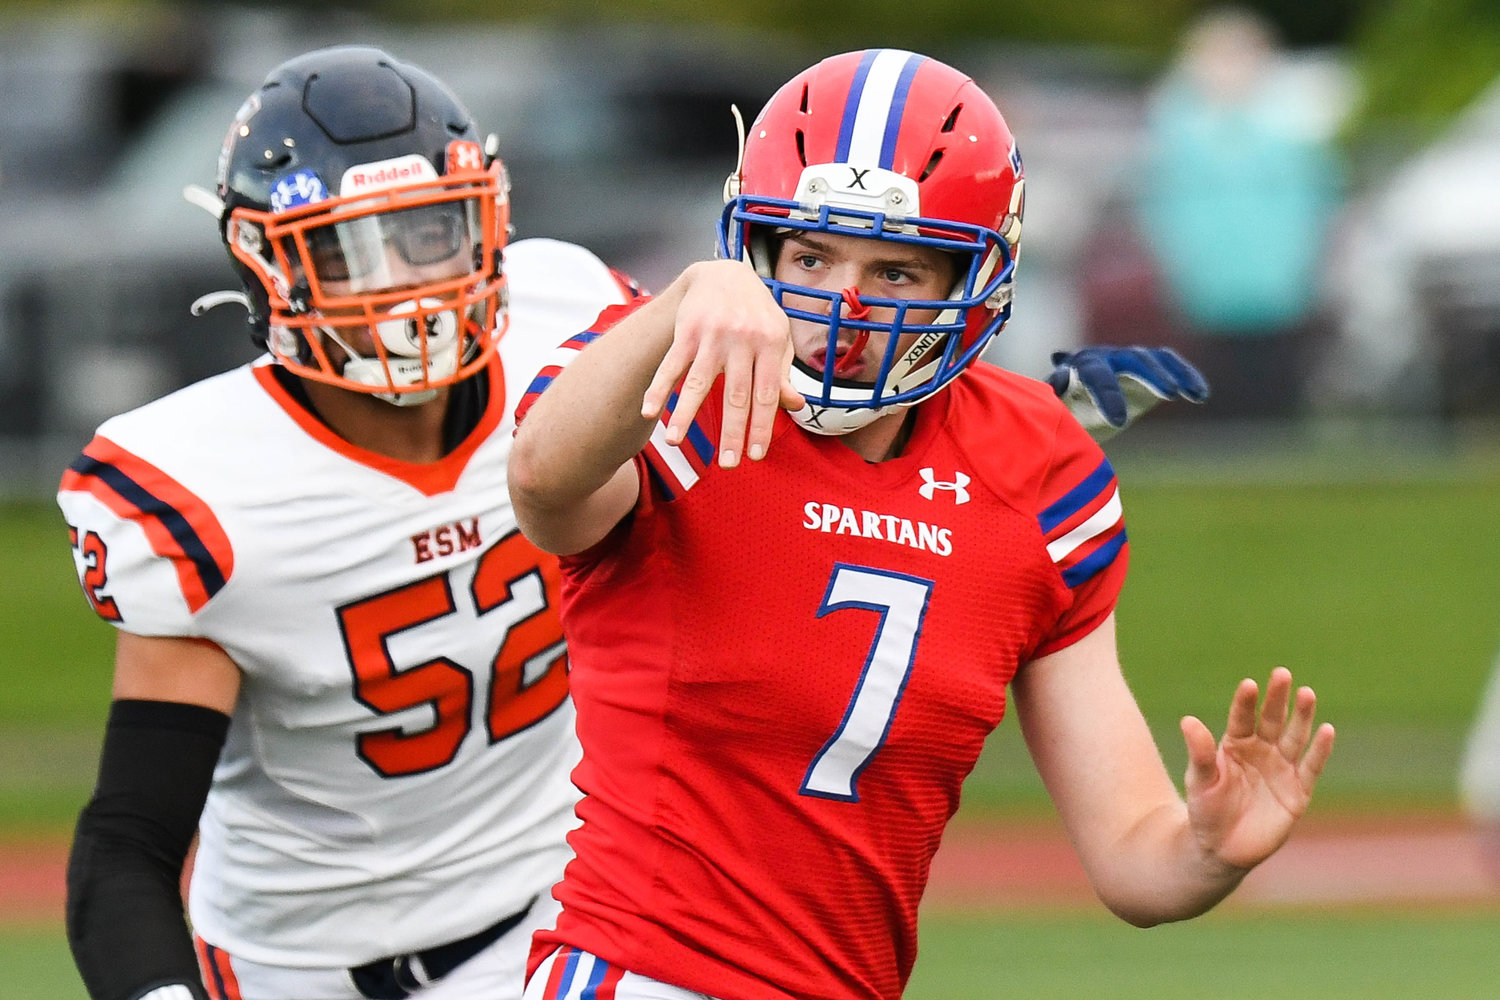 New Hartford quarterback Dominic Ambrose (7) had 99 yards passing and a touchdown Friday to help the Spartans improve to 2-1 overall during the 2022 season.